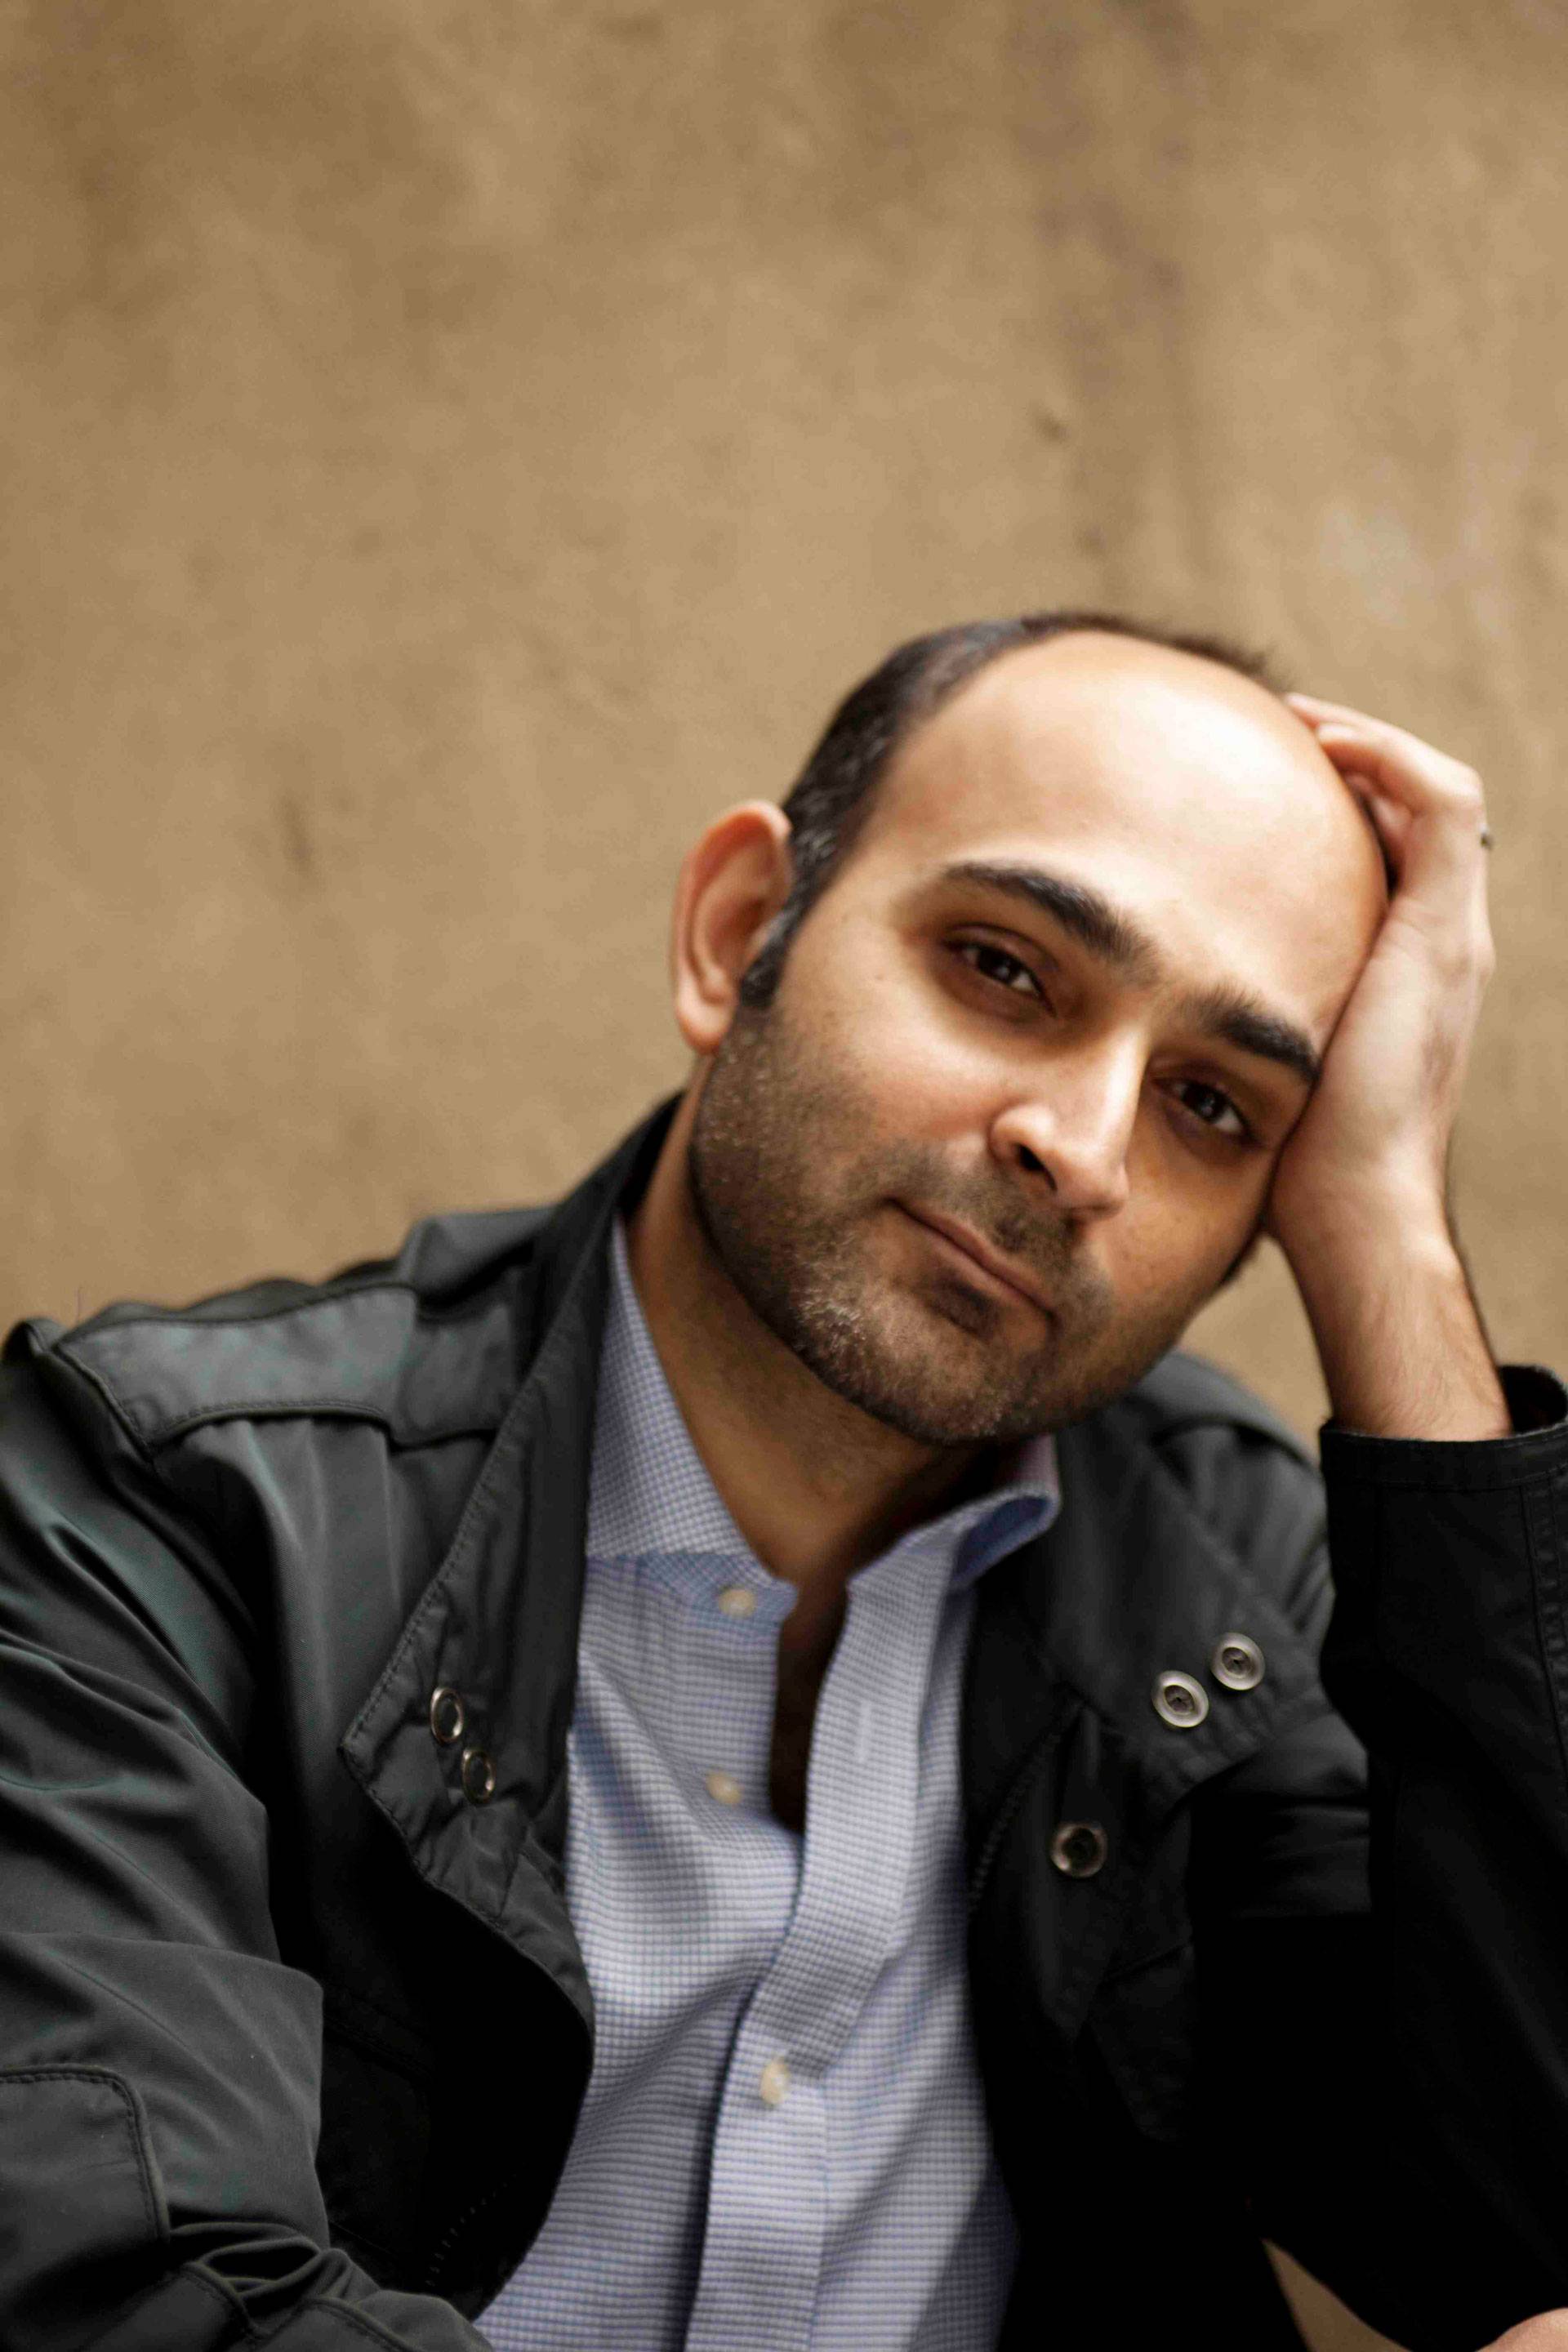 Portrait of Mohsin Hamid leaning his head on one hand, wearing a black jacket and blue-and-white checked shirt